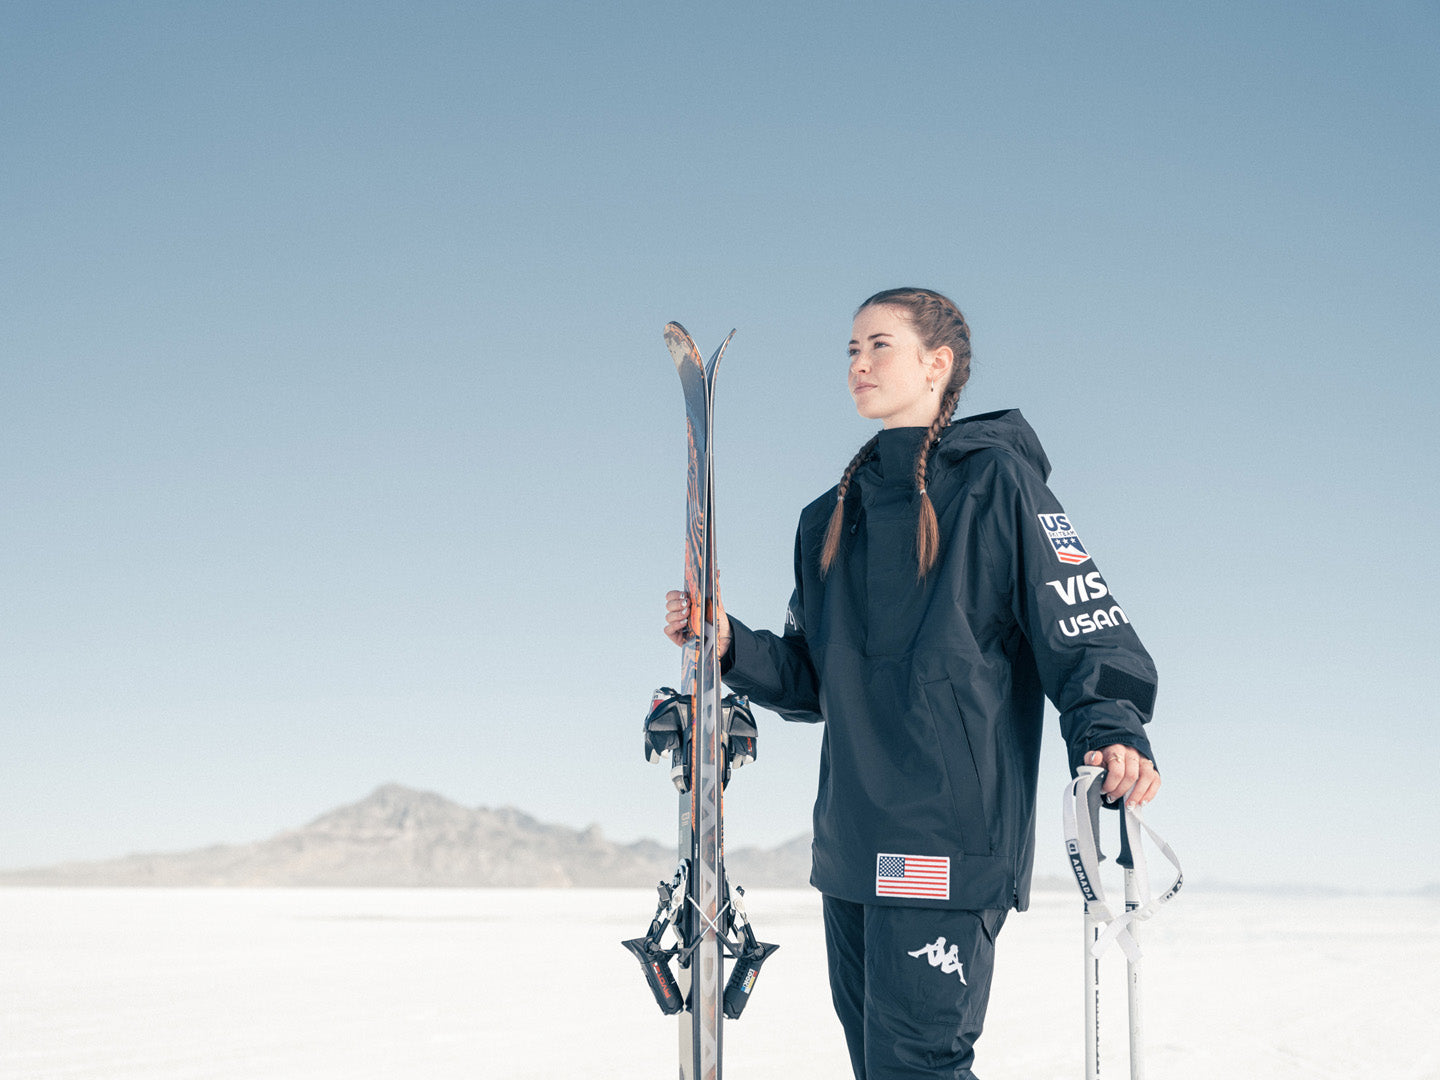 Female US ski athlete holding ski in her right hand, poles in her left hand, standing on salt flats looking off into the distance